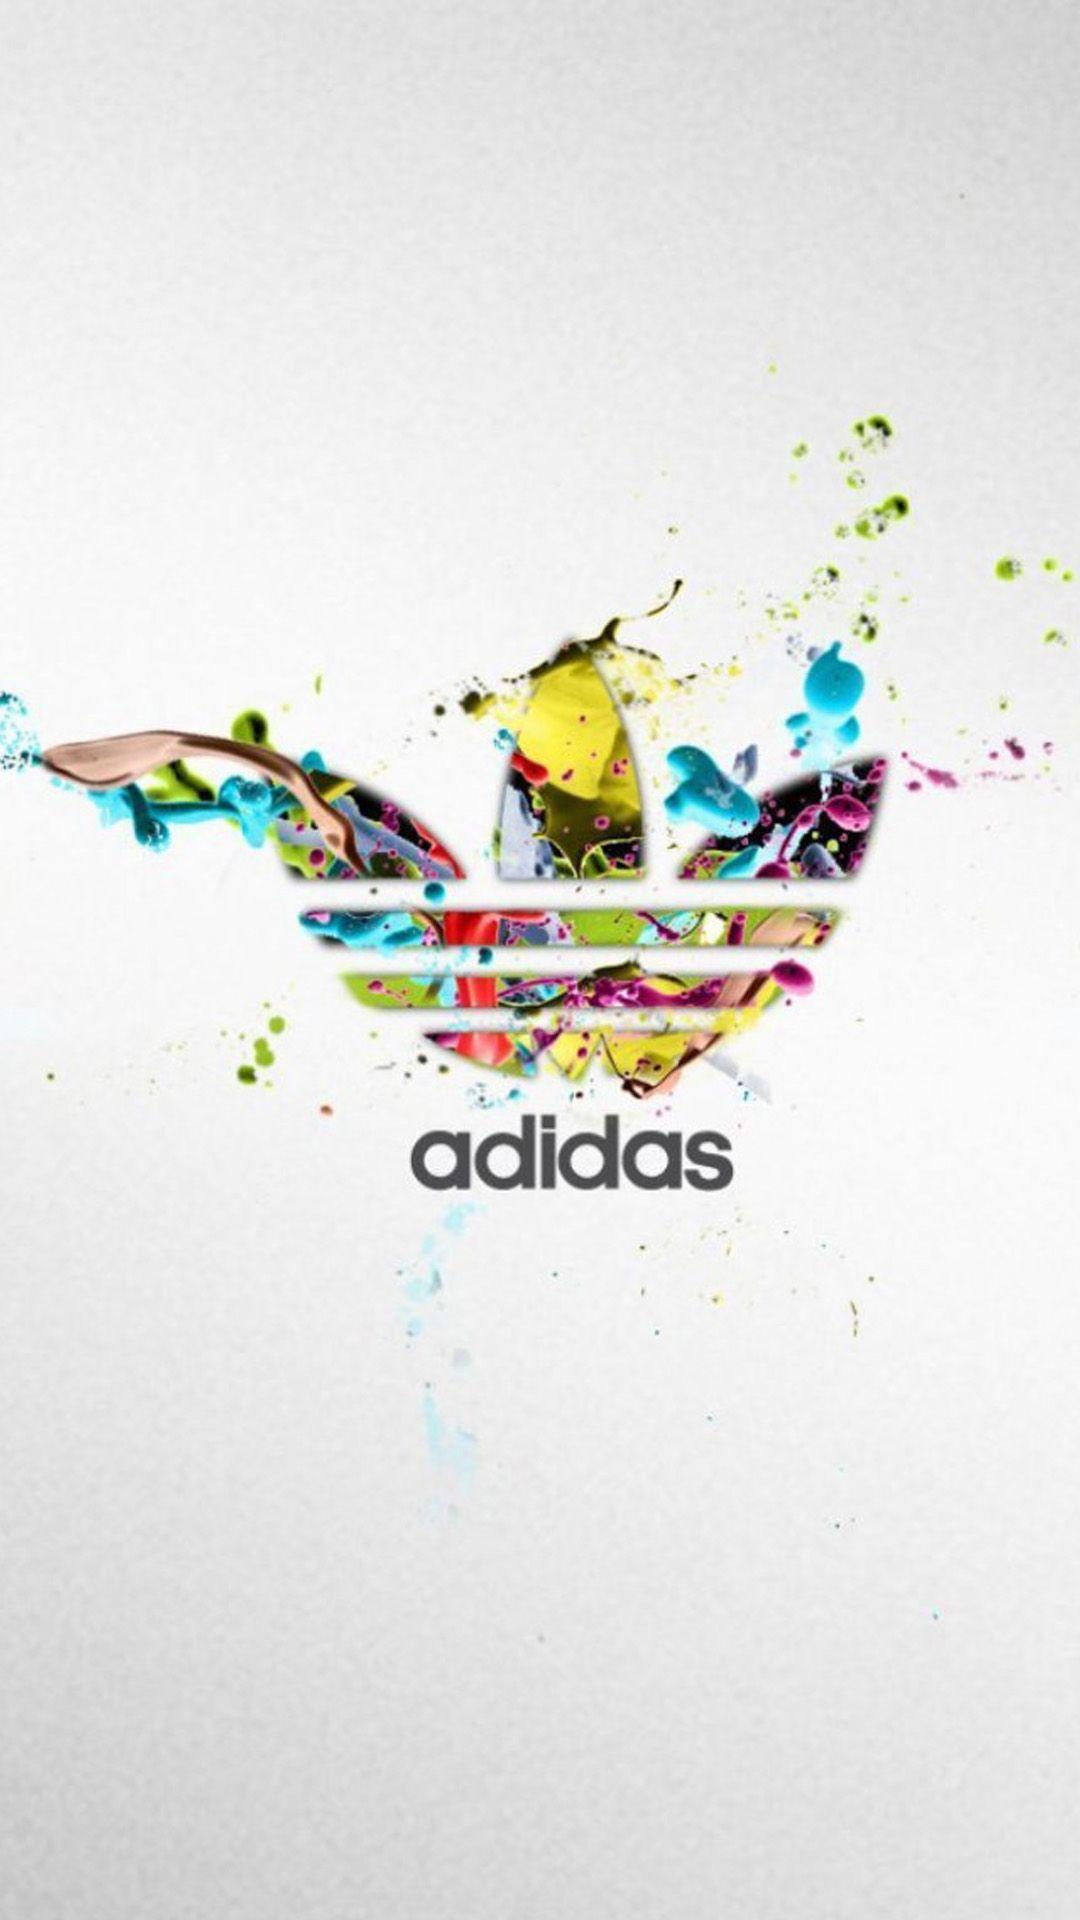 Adidas Backgrounds For Iphone